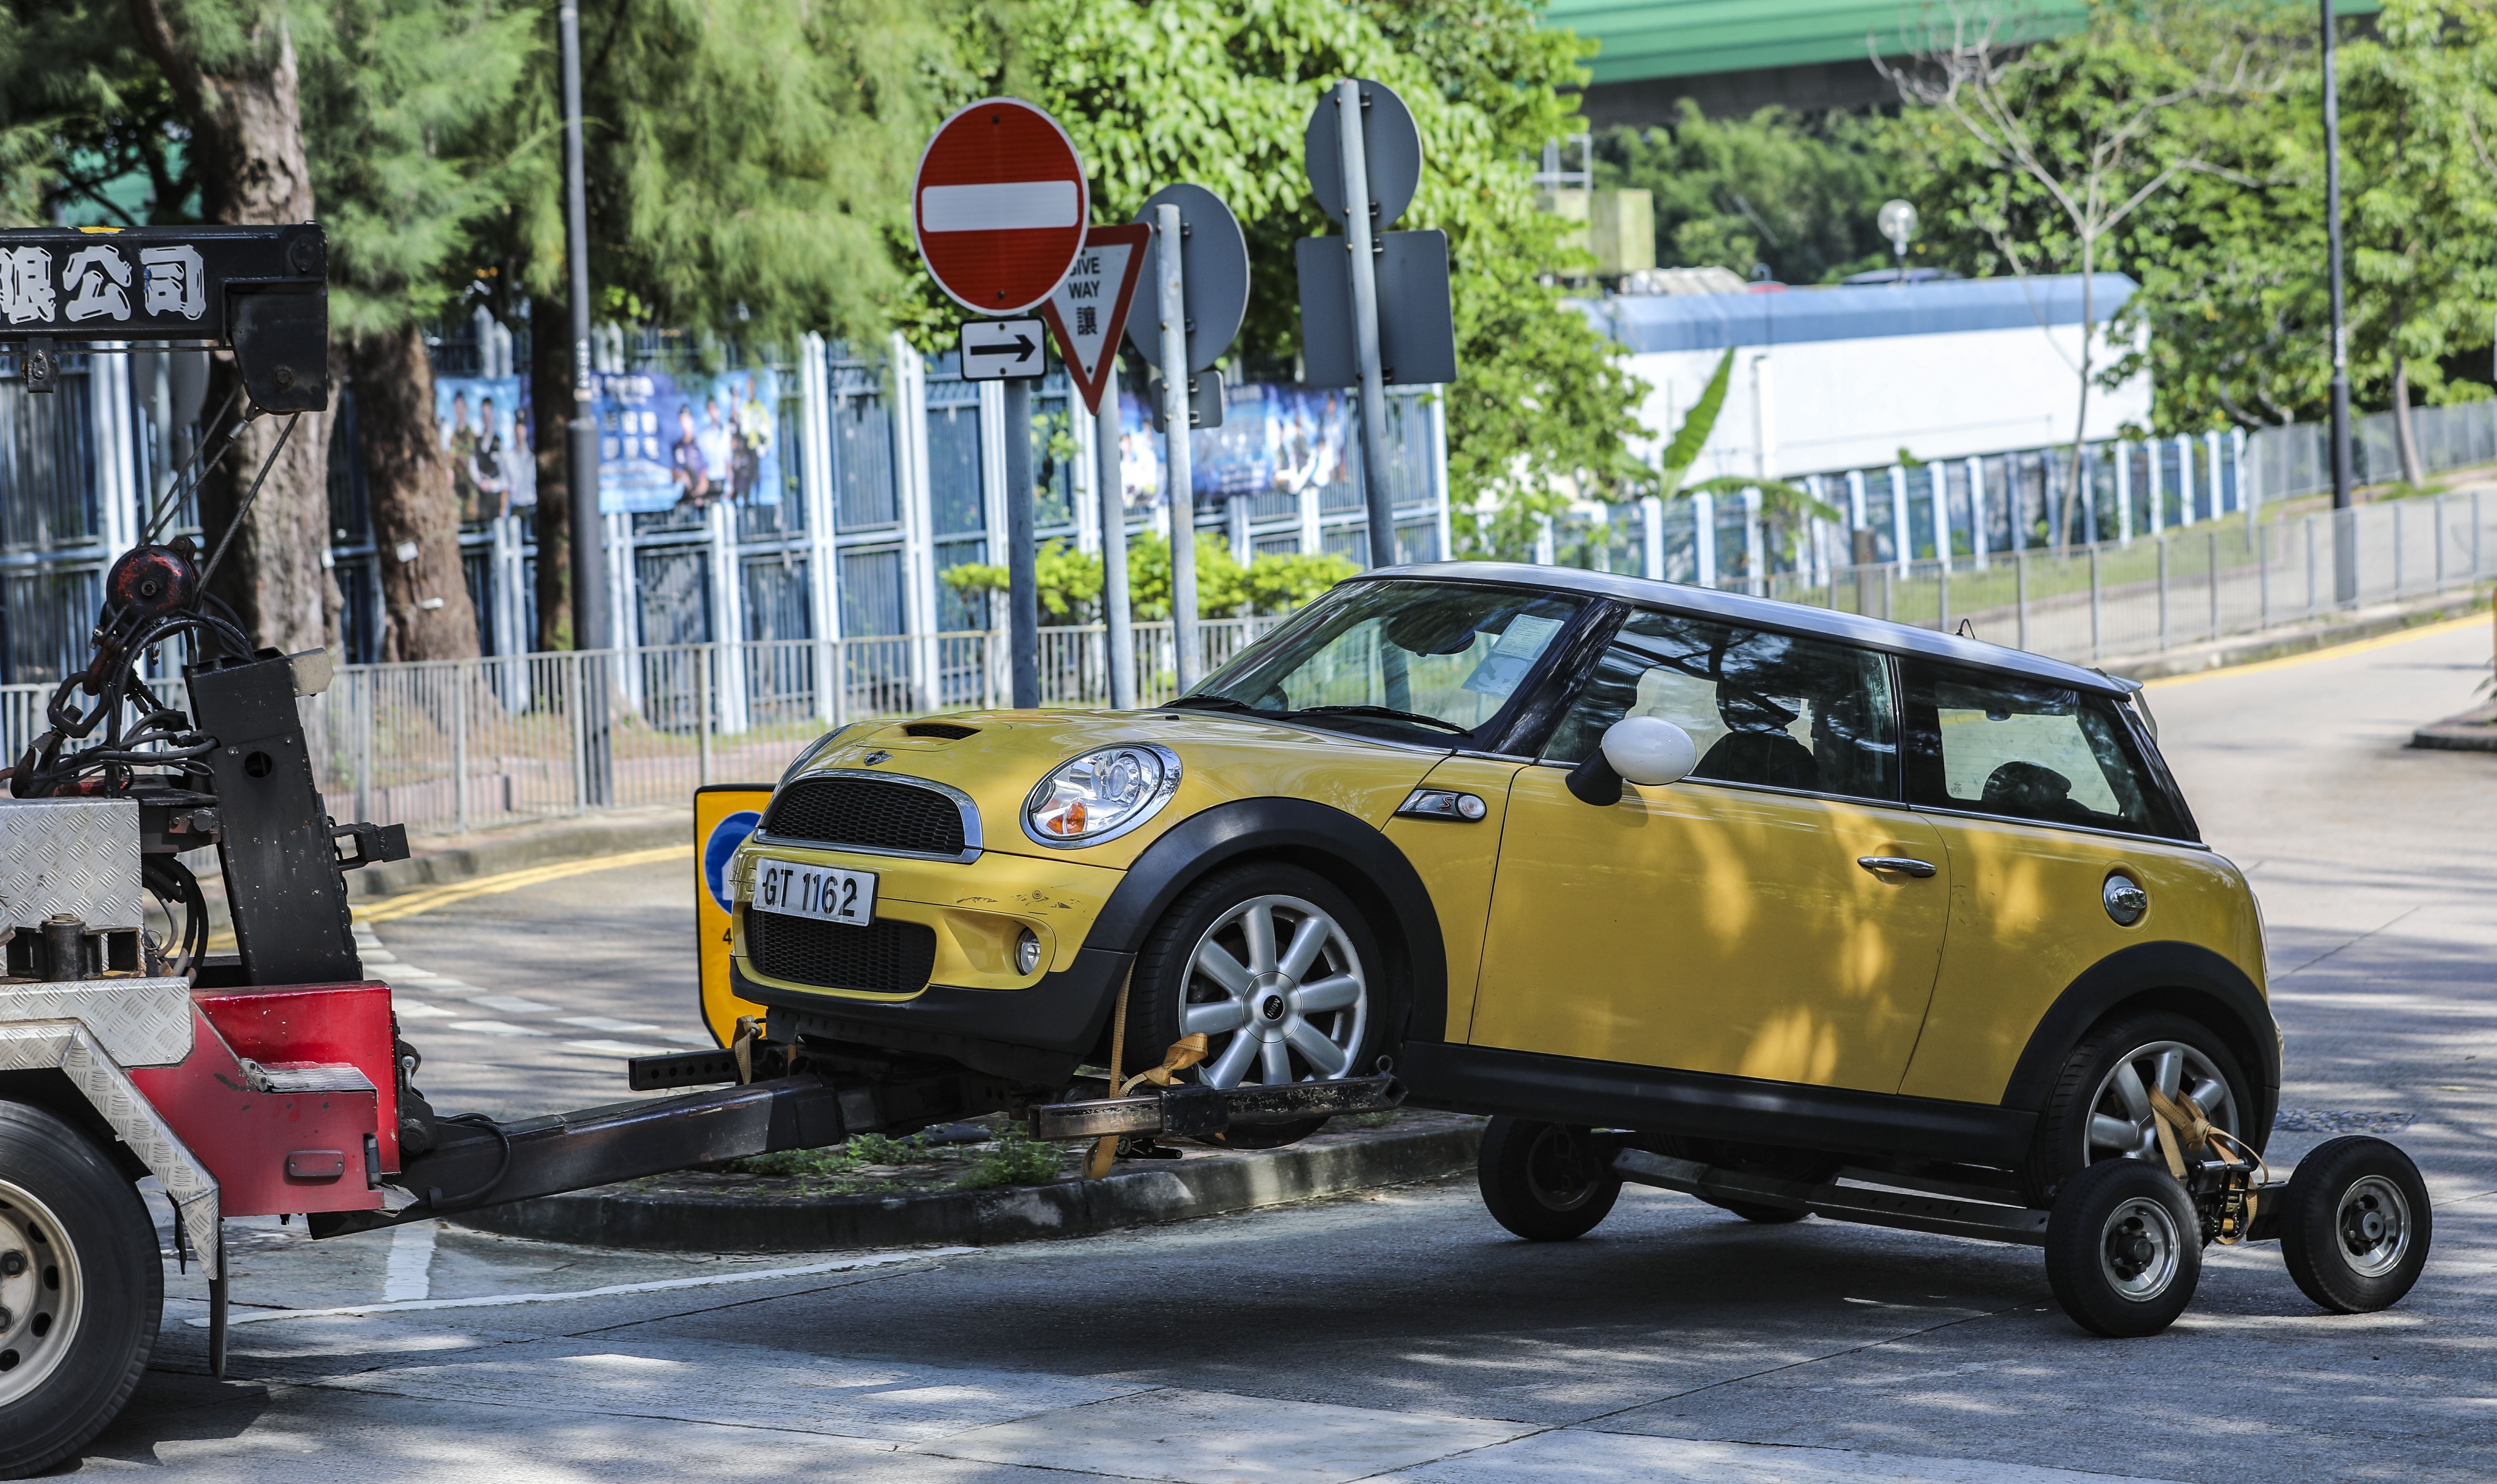 The jury in the trial were on Tuesday taken to view the Mini Cooper involved in the deaths. Photo: Sam Tsang